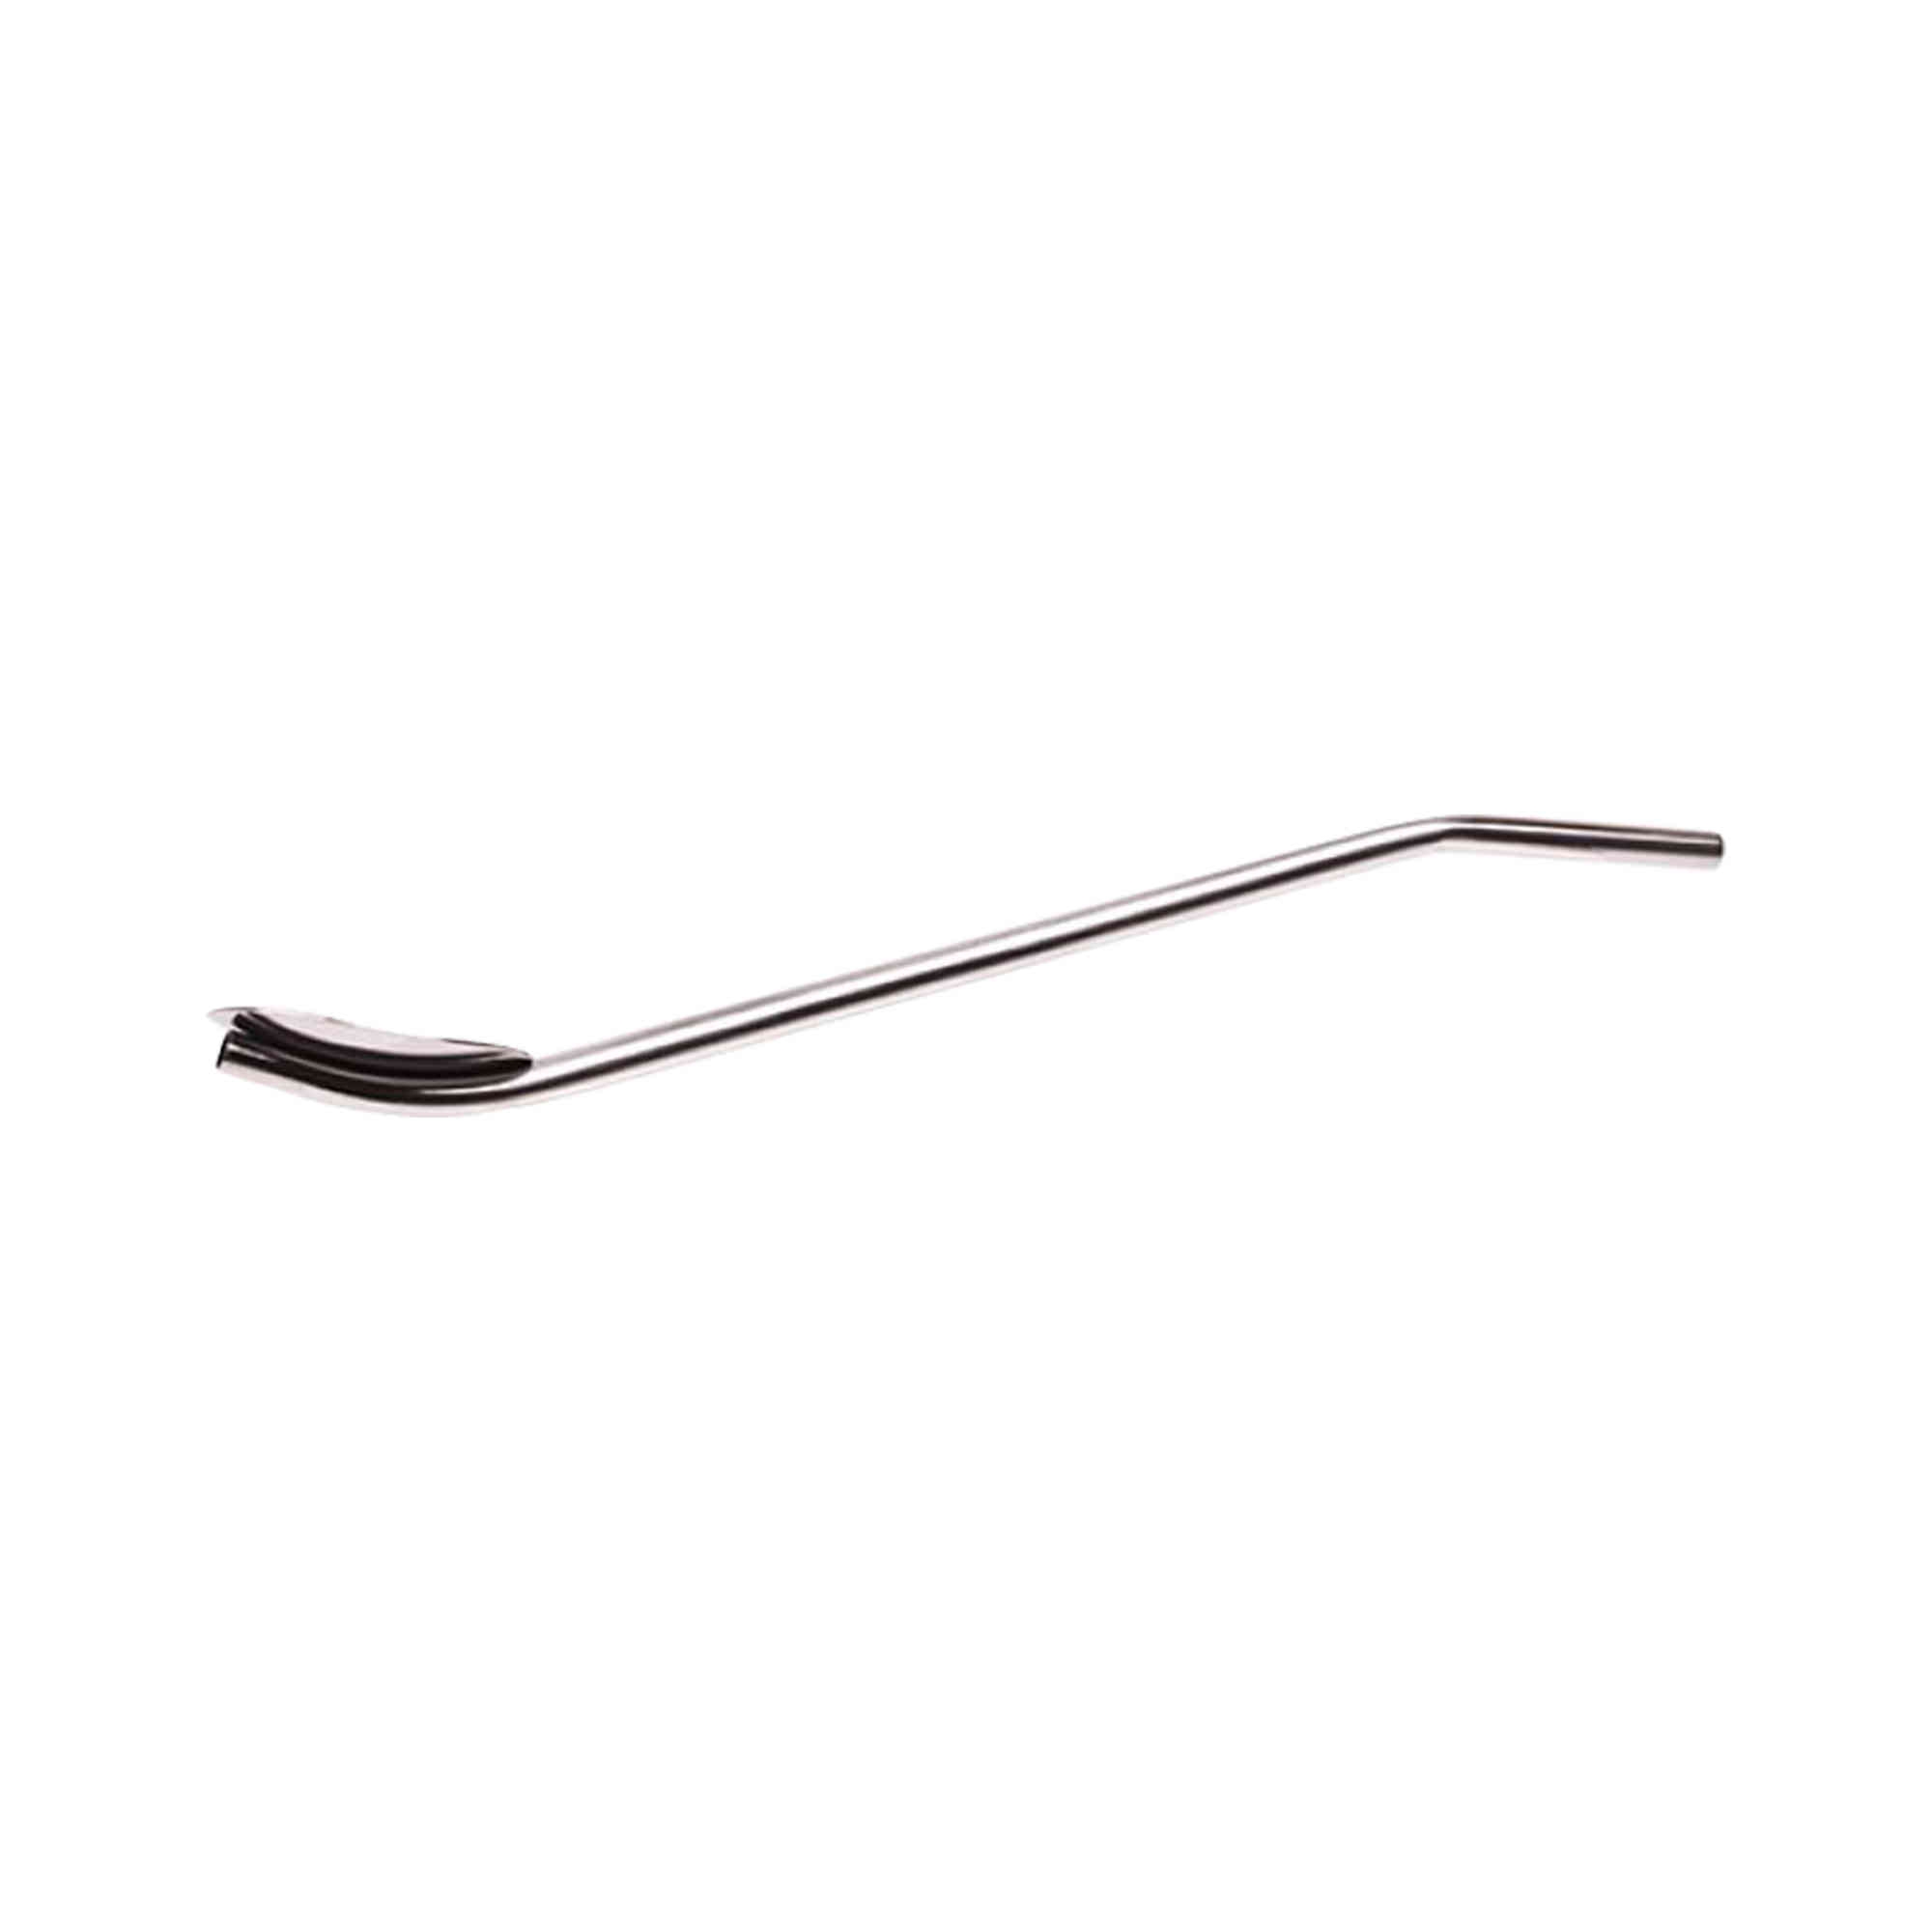 Casabarista Stainless Steel Spoon and Straw Image 2